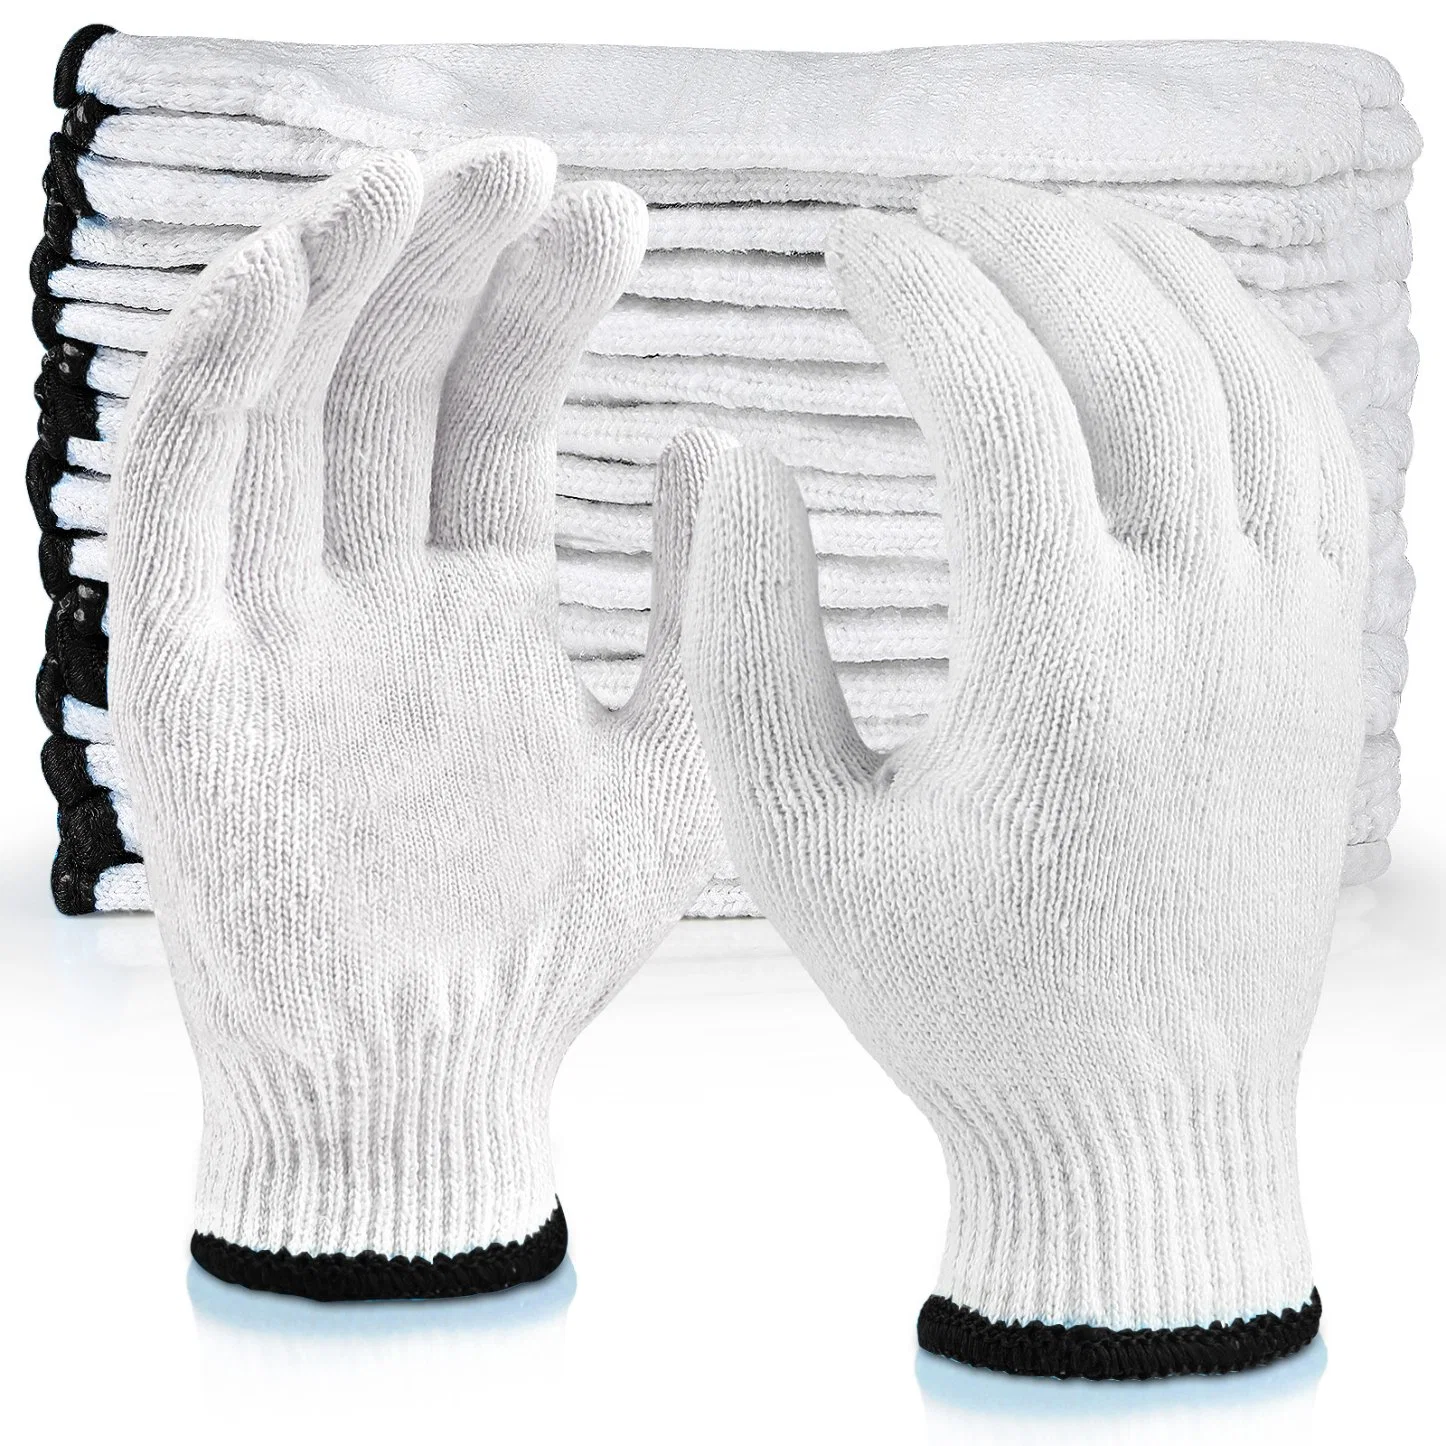 China Wholesale/Supplier 30-70g/Pair Hand Guantes Safety Work Glove Cotton Knitted Gloves